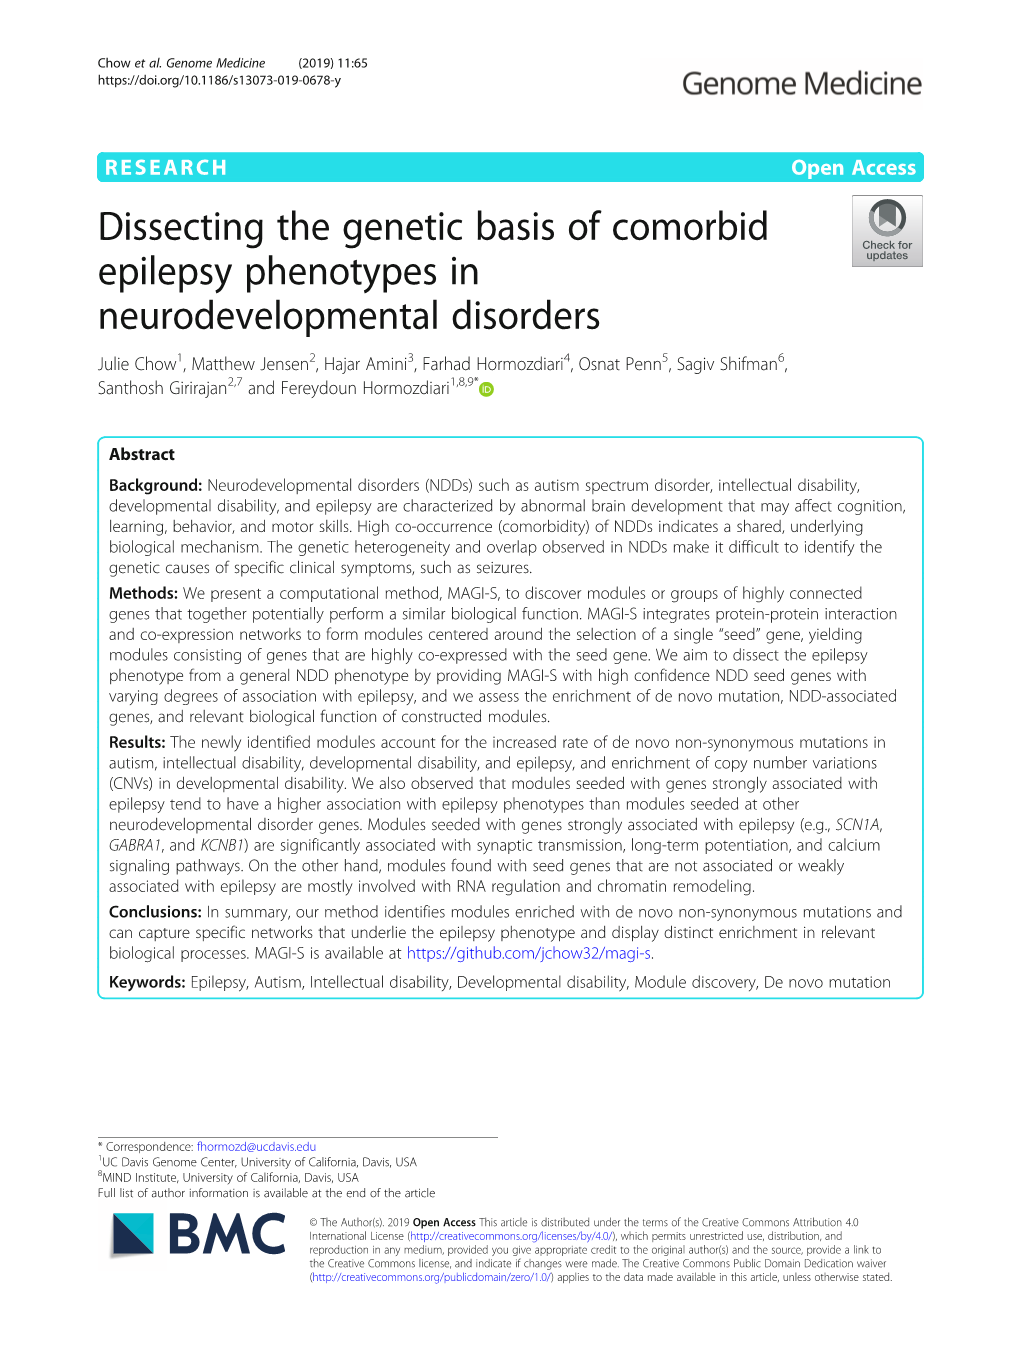 Dissecting the Genetic Basis of Comorbid Epilepsy Phenotypes In